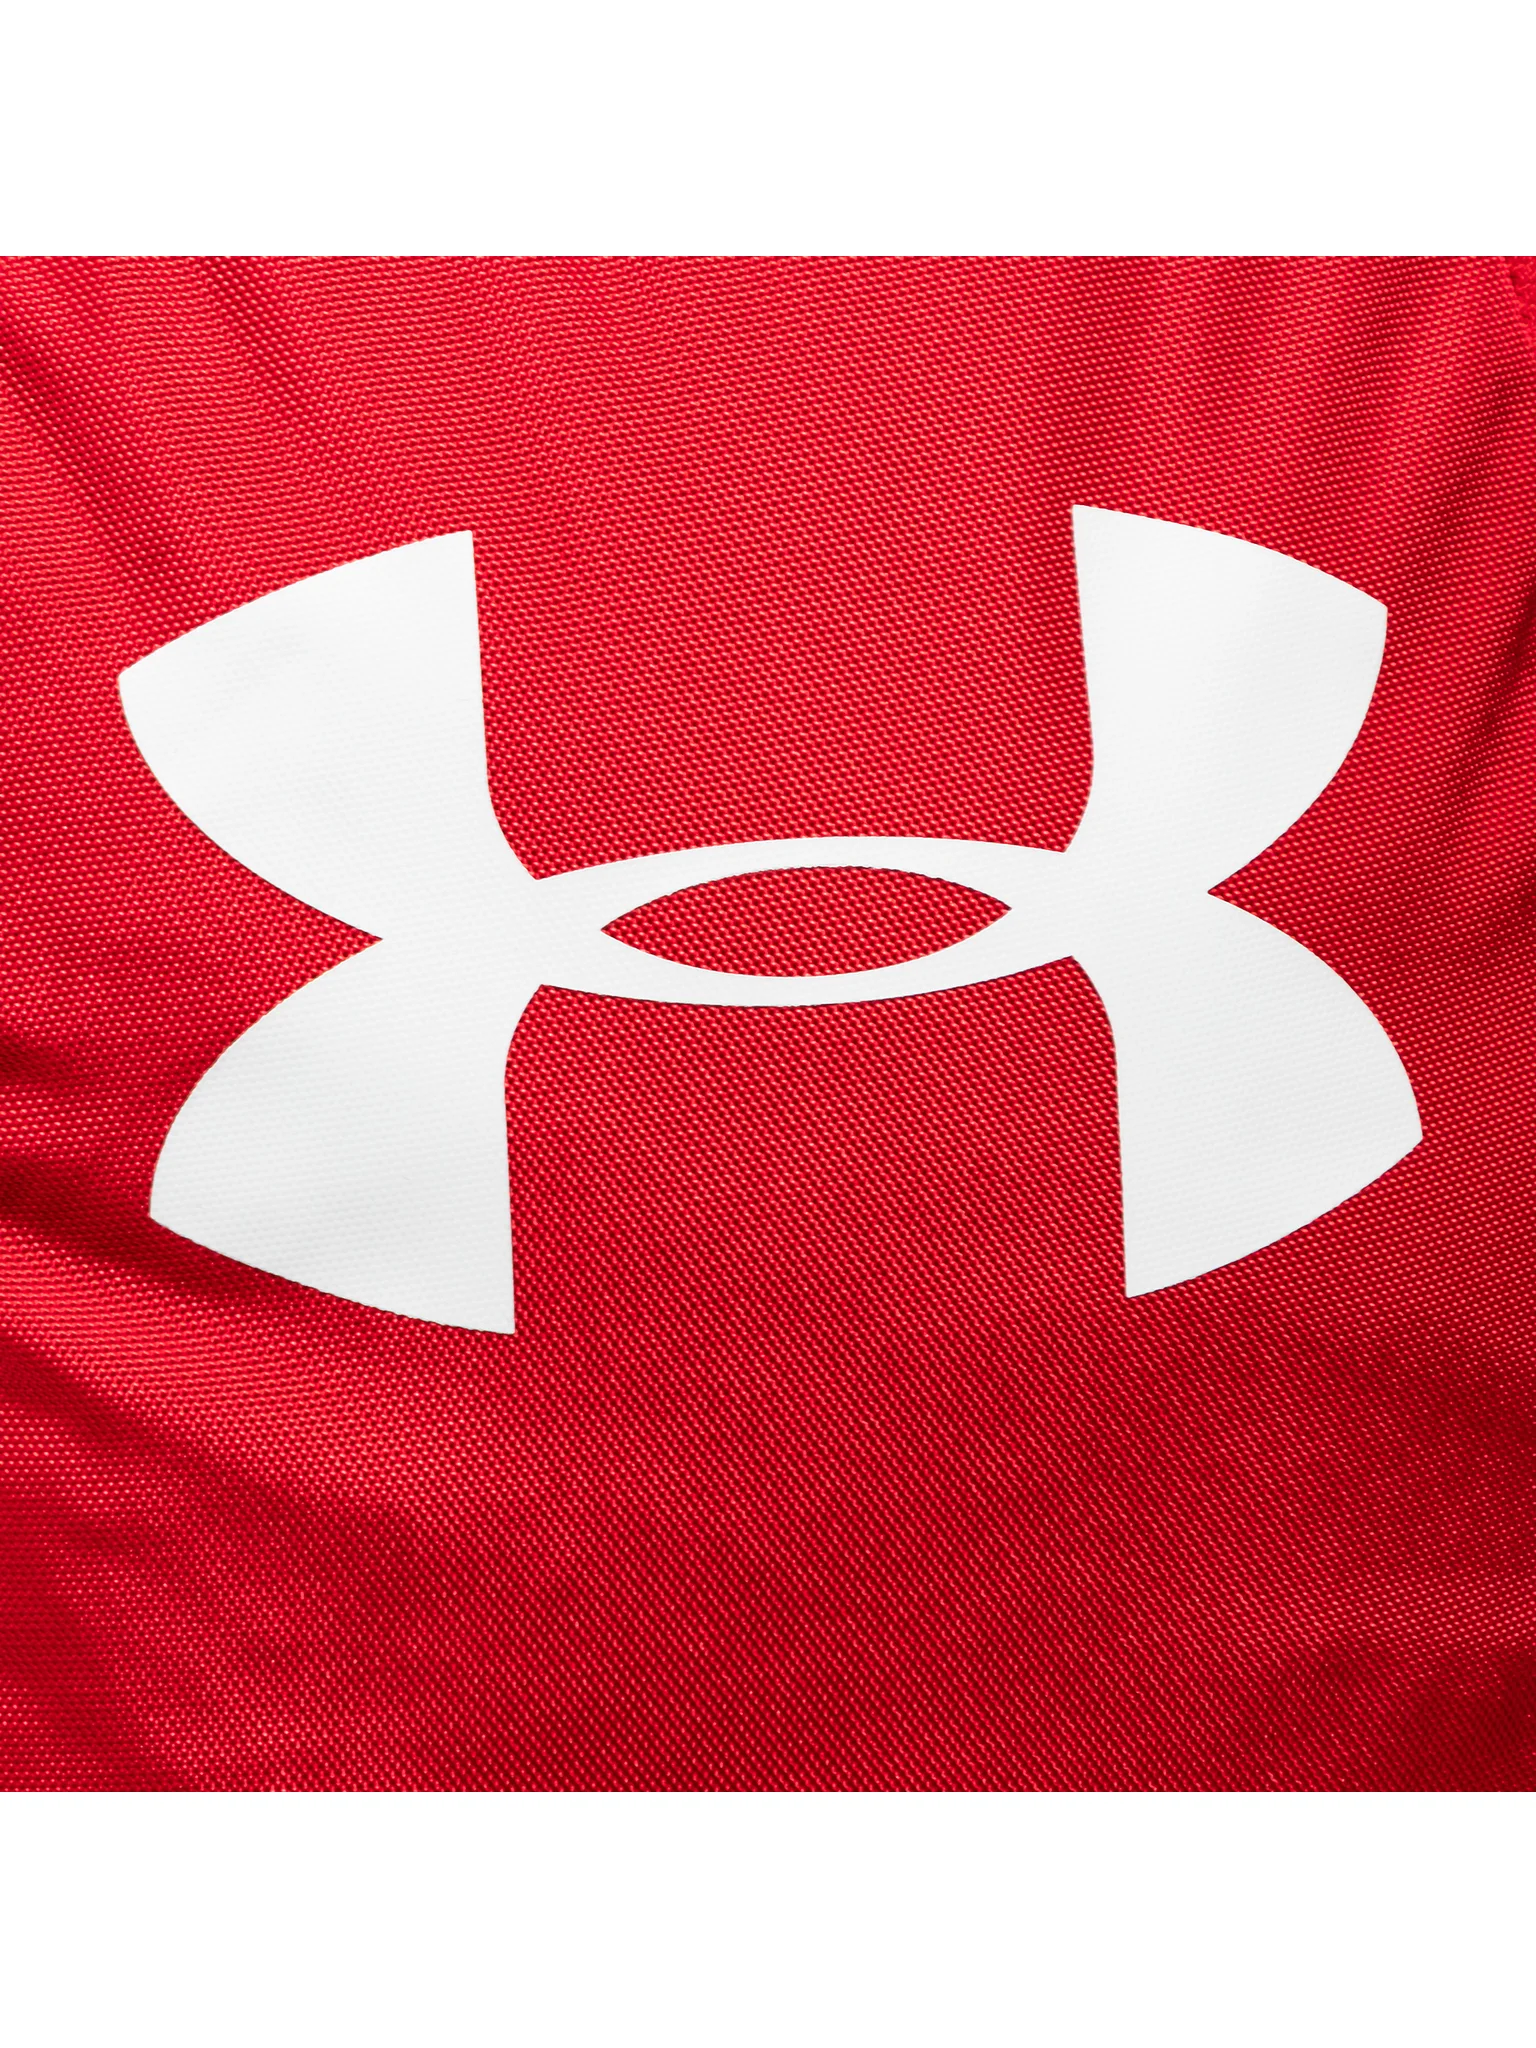 Rucsac Under Armour SCRIMMAGE 2.0 BACKPACK - Rosu [3]